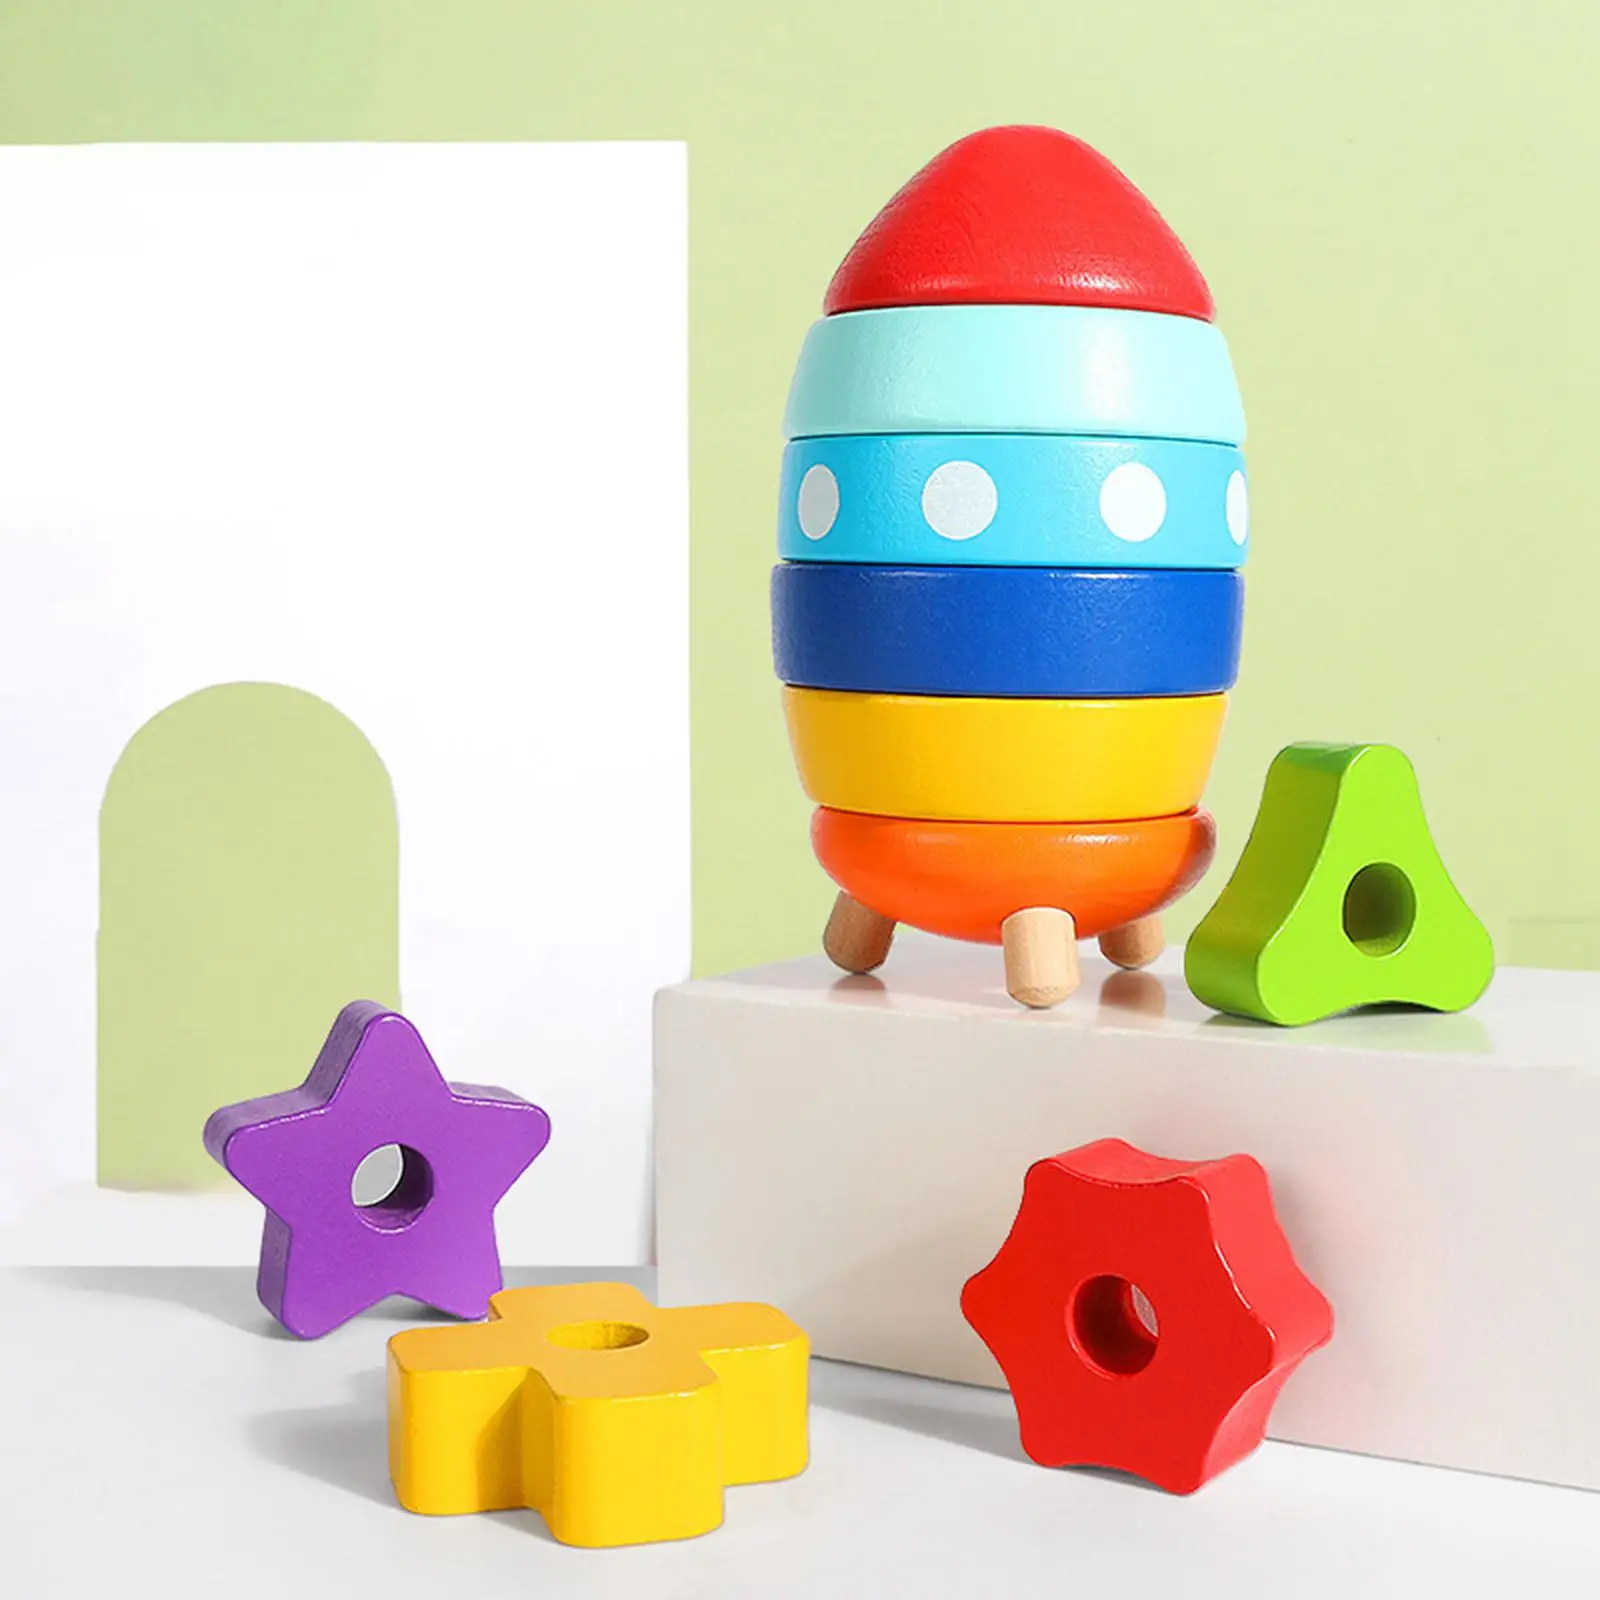 Wooden Colorful Rocket Shaped Stacking Toys Six Plug-in Parts Color Sorting